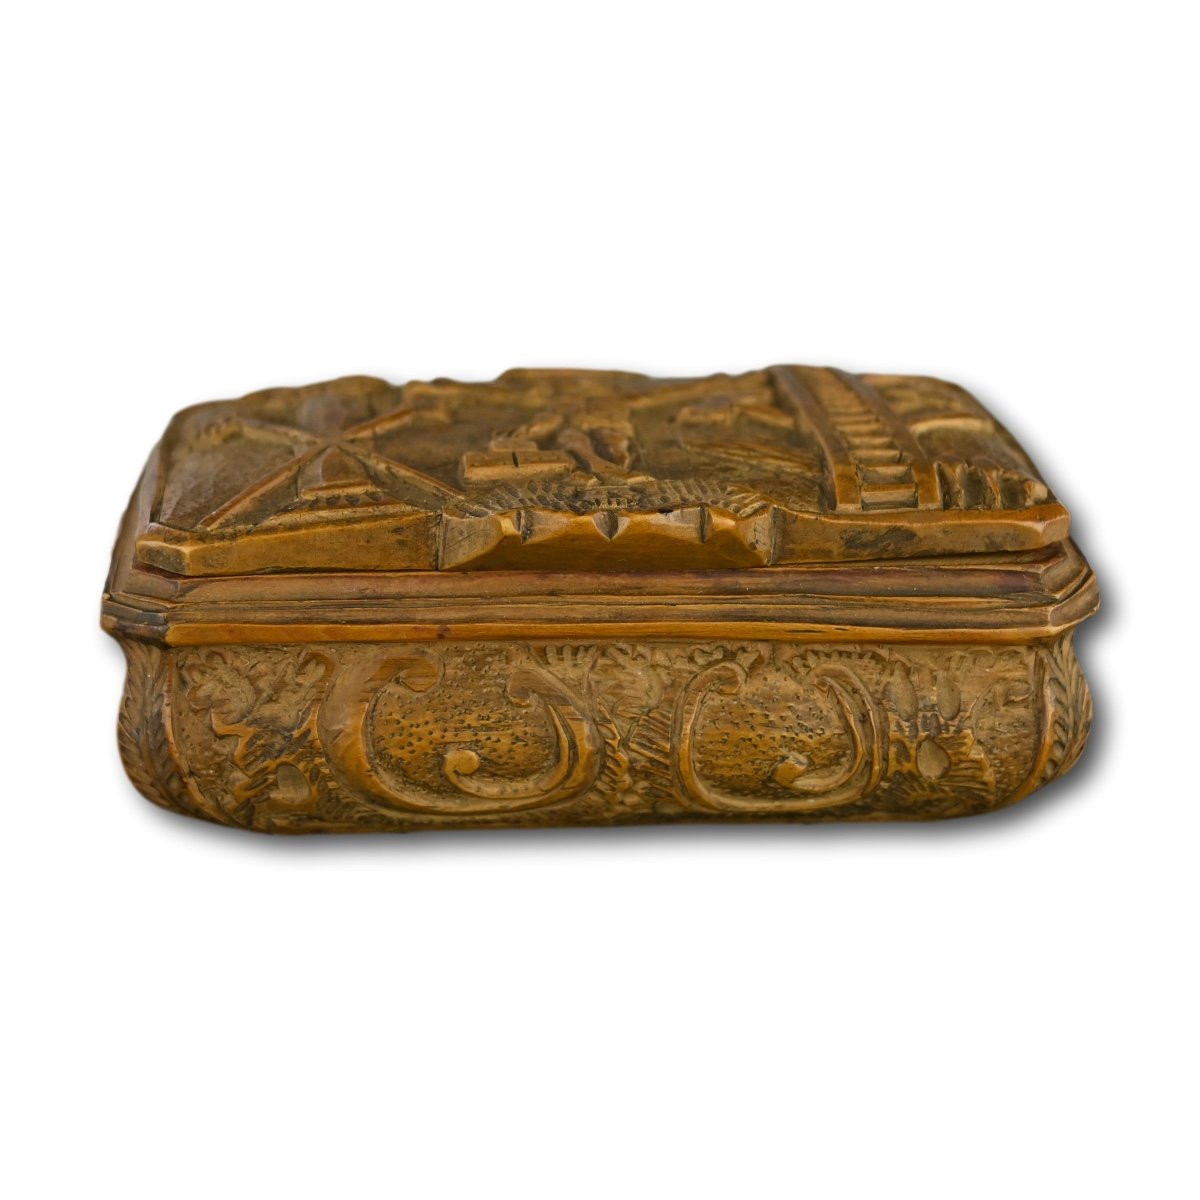 Boxwood Snuff Box Carved With The Crucifixion. German, 18th Century.-photo-6